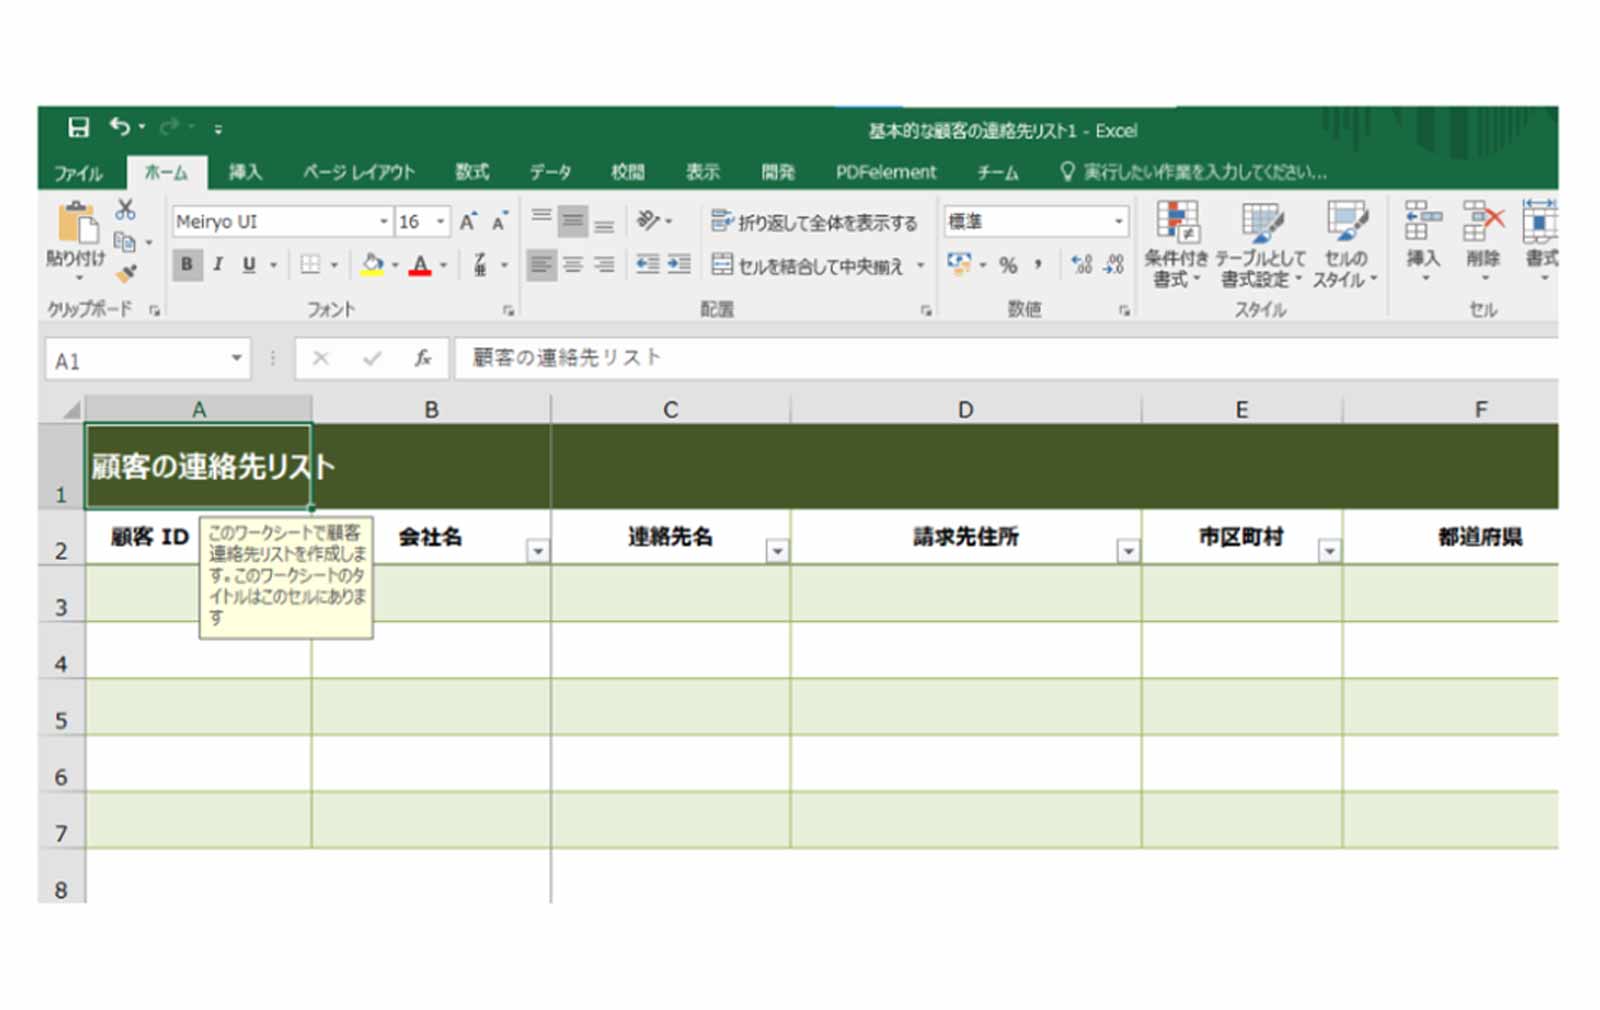 Excel（エクセル）で顧客リストを作成する方法を紹介！